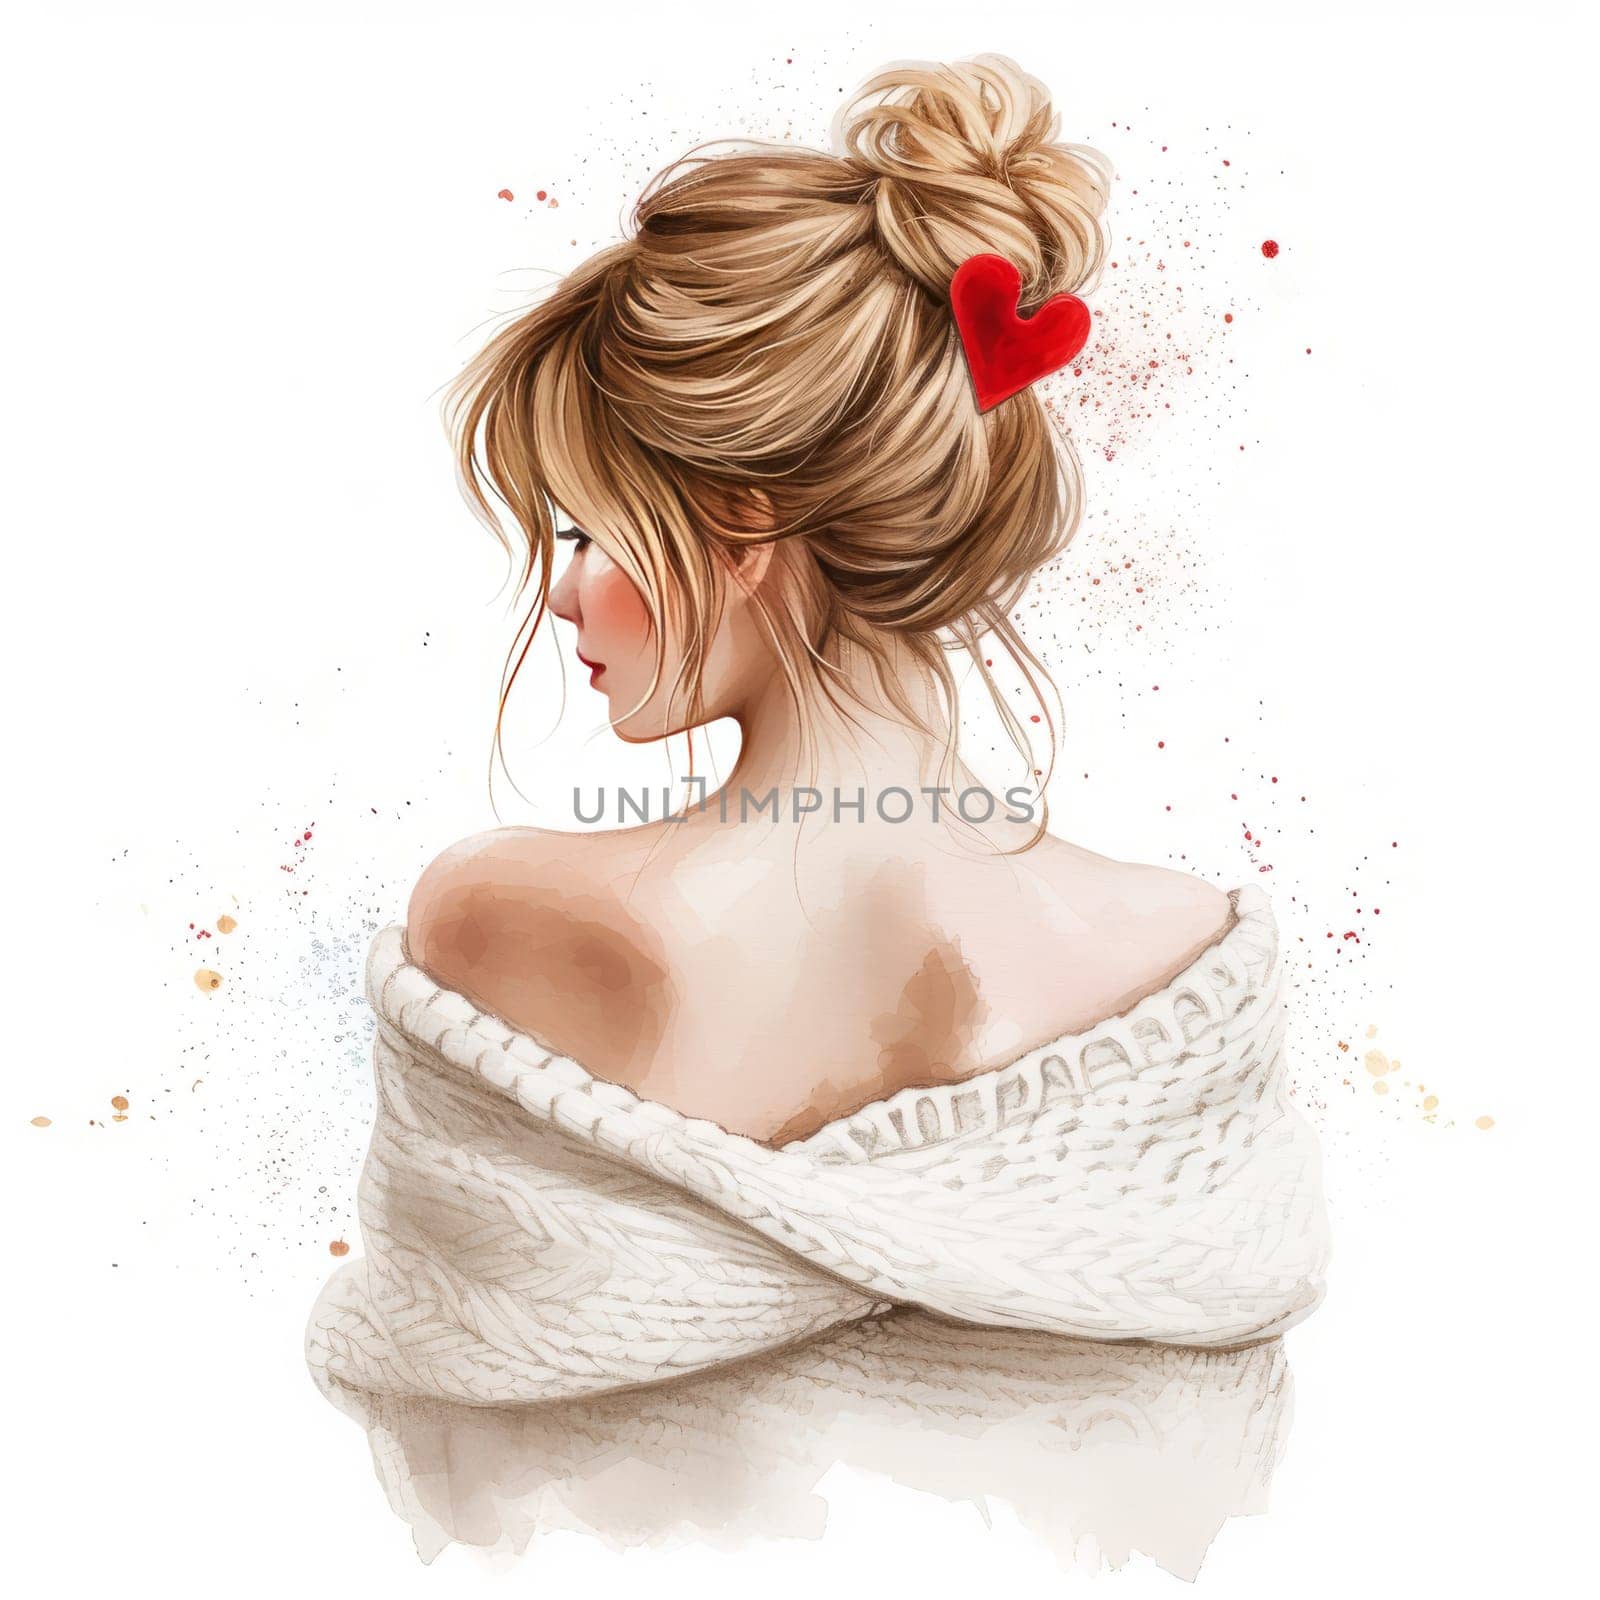 Png Watercolor Beautiful Romantic Young Woman Back View Illustration, Messy Hair with Heart Shape Hairpin. Valentine's Day or Birthday Clip Art